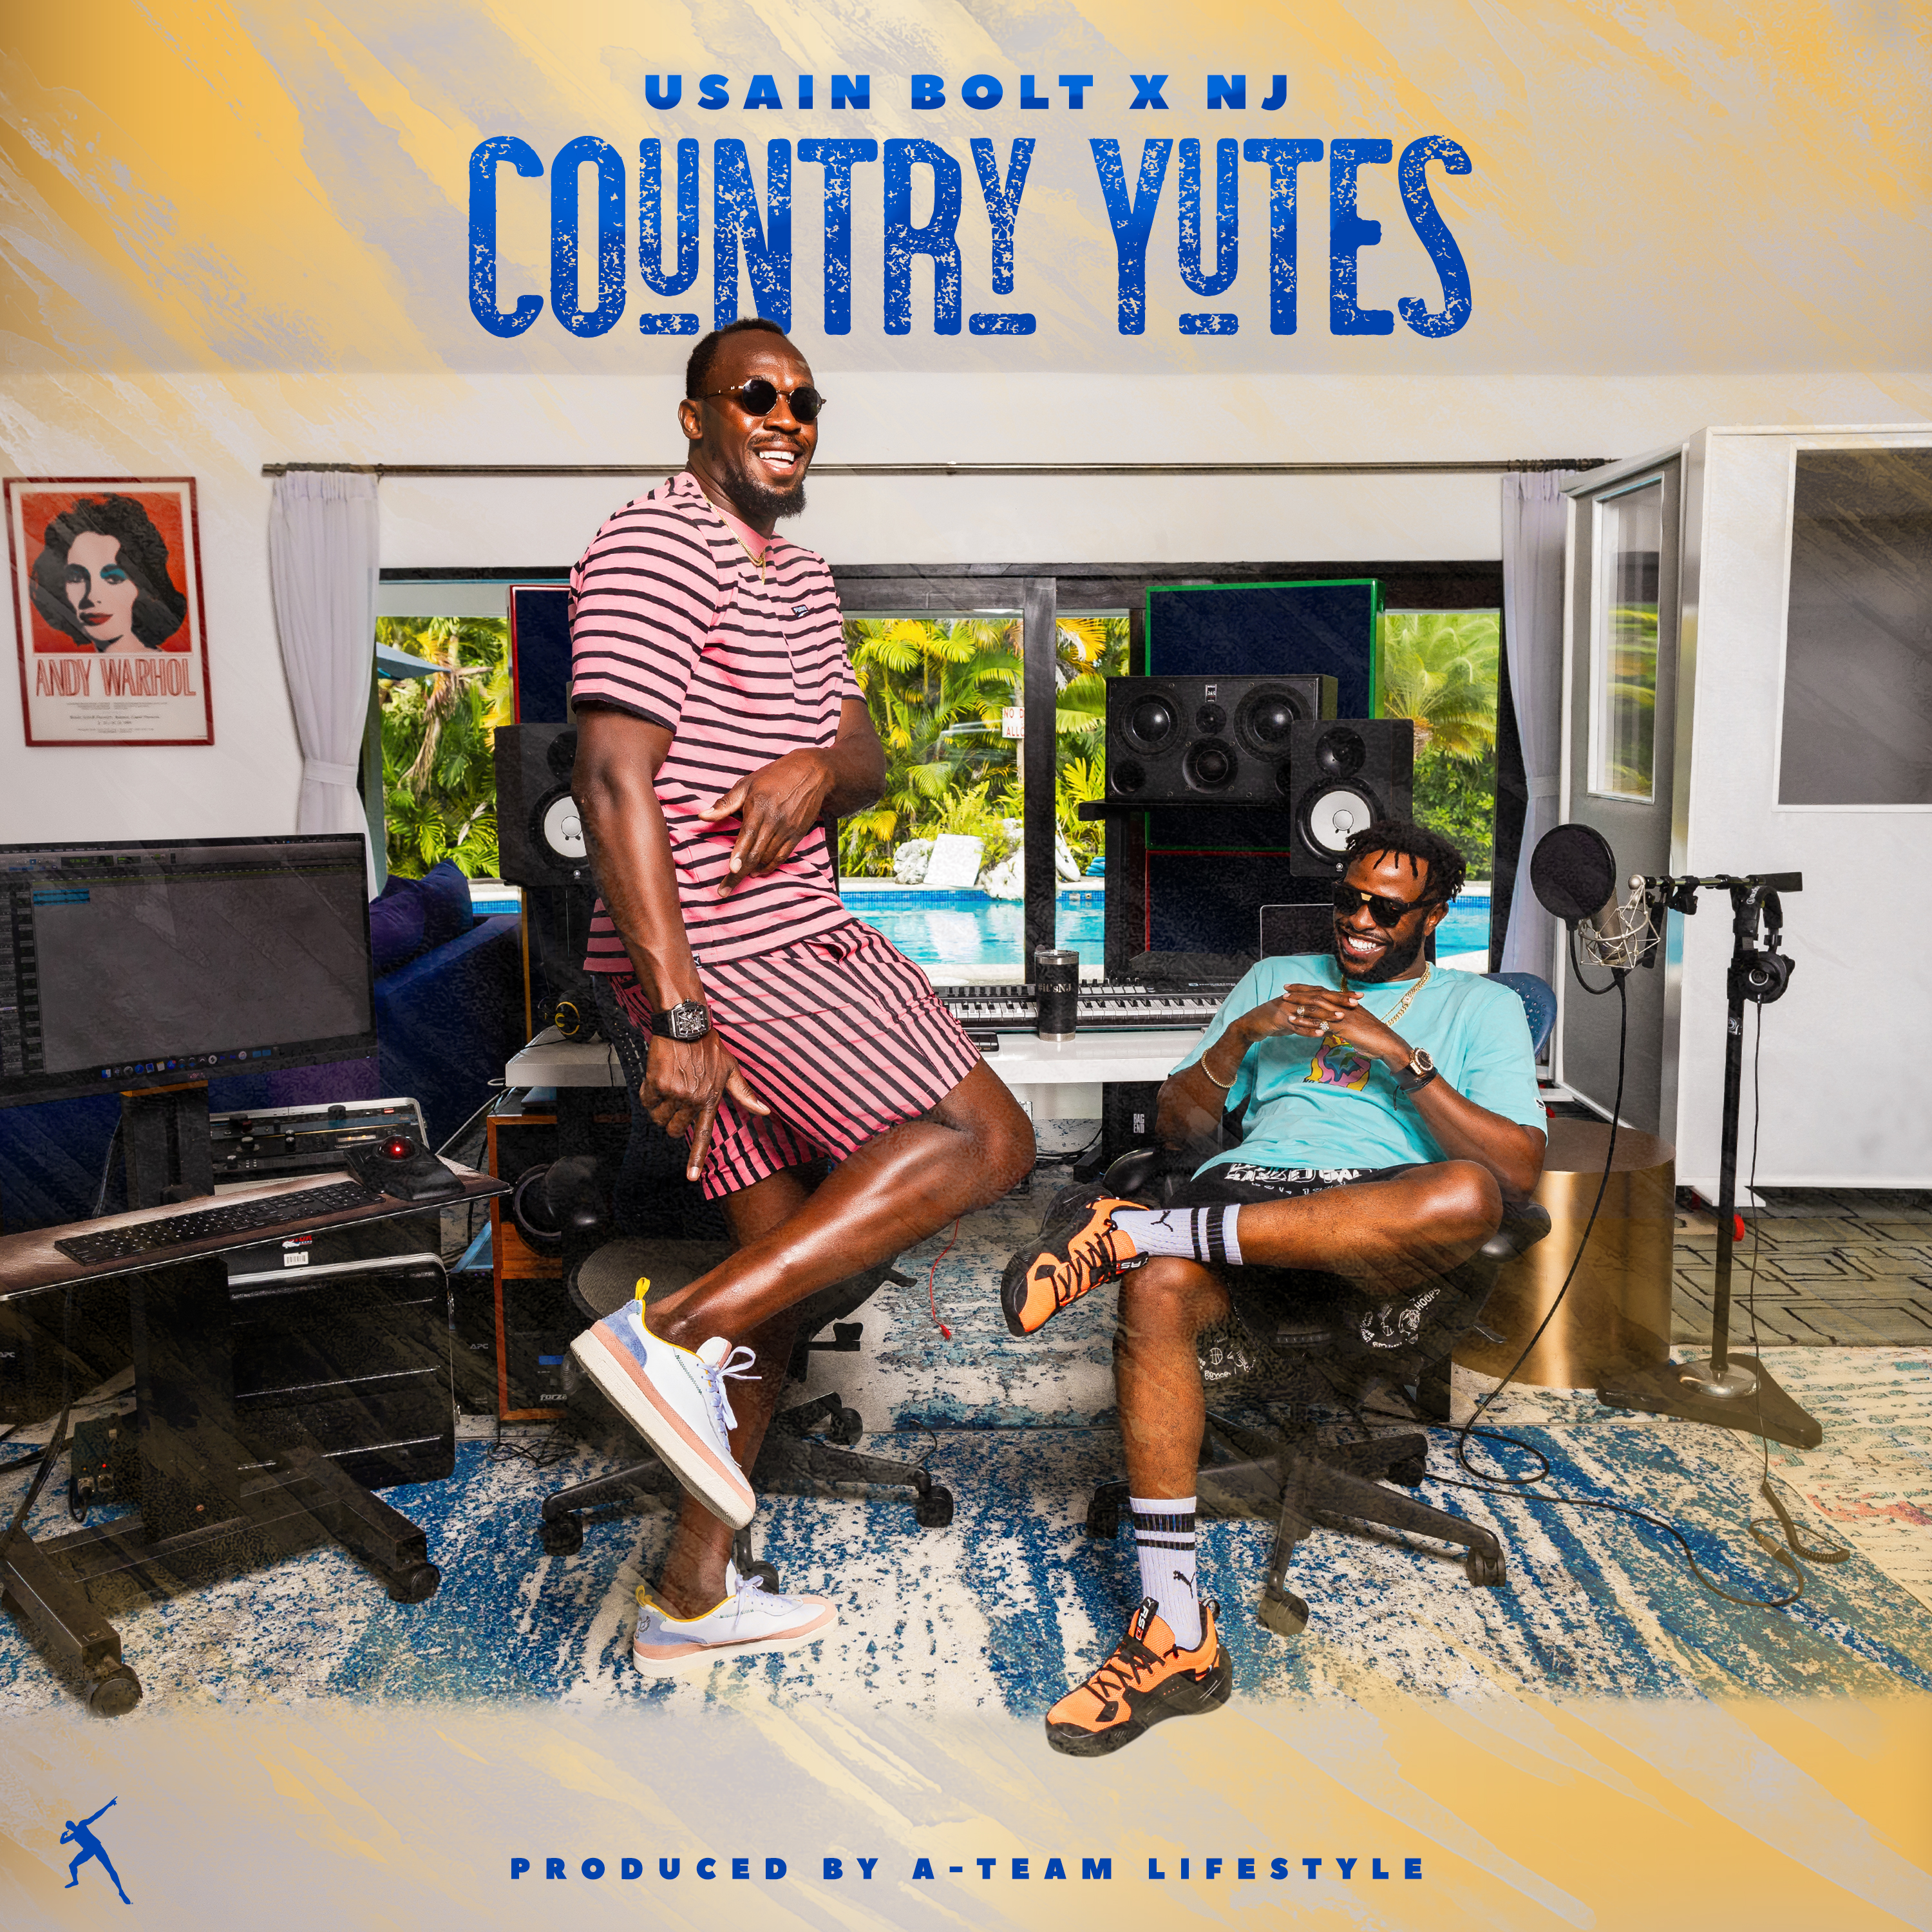 USAIN BOLT LIVES THE DREAM ON HIS LATEST RELEASES EAGERLY AWAITED DEBUT ALBUM “COUNTRY YUTES”